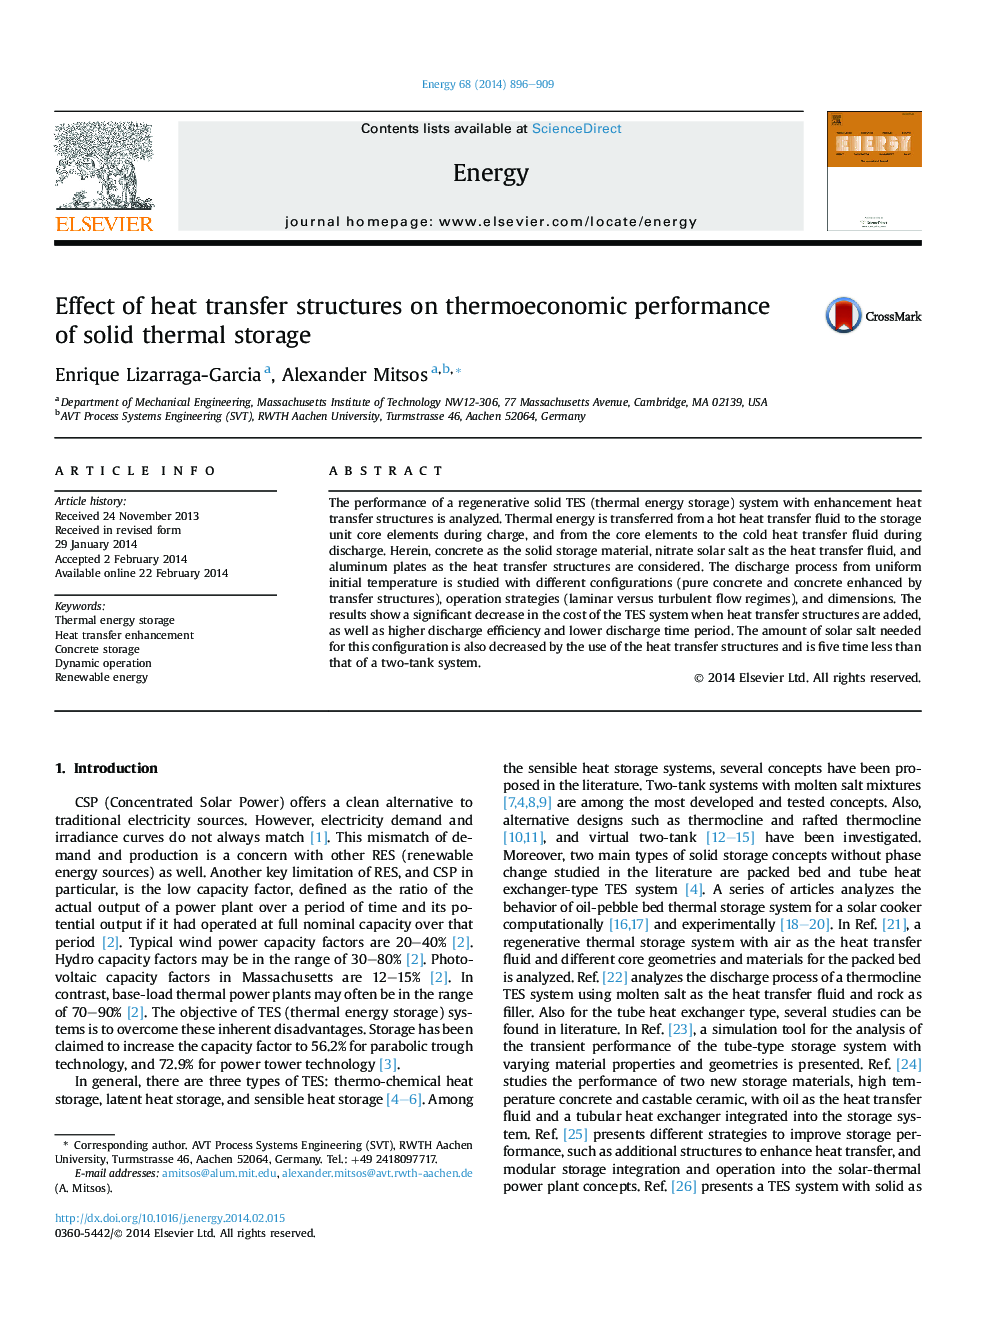 Effect of heat transfer structures on thermoeconomic performance of solid thermal storage